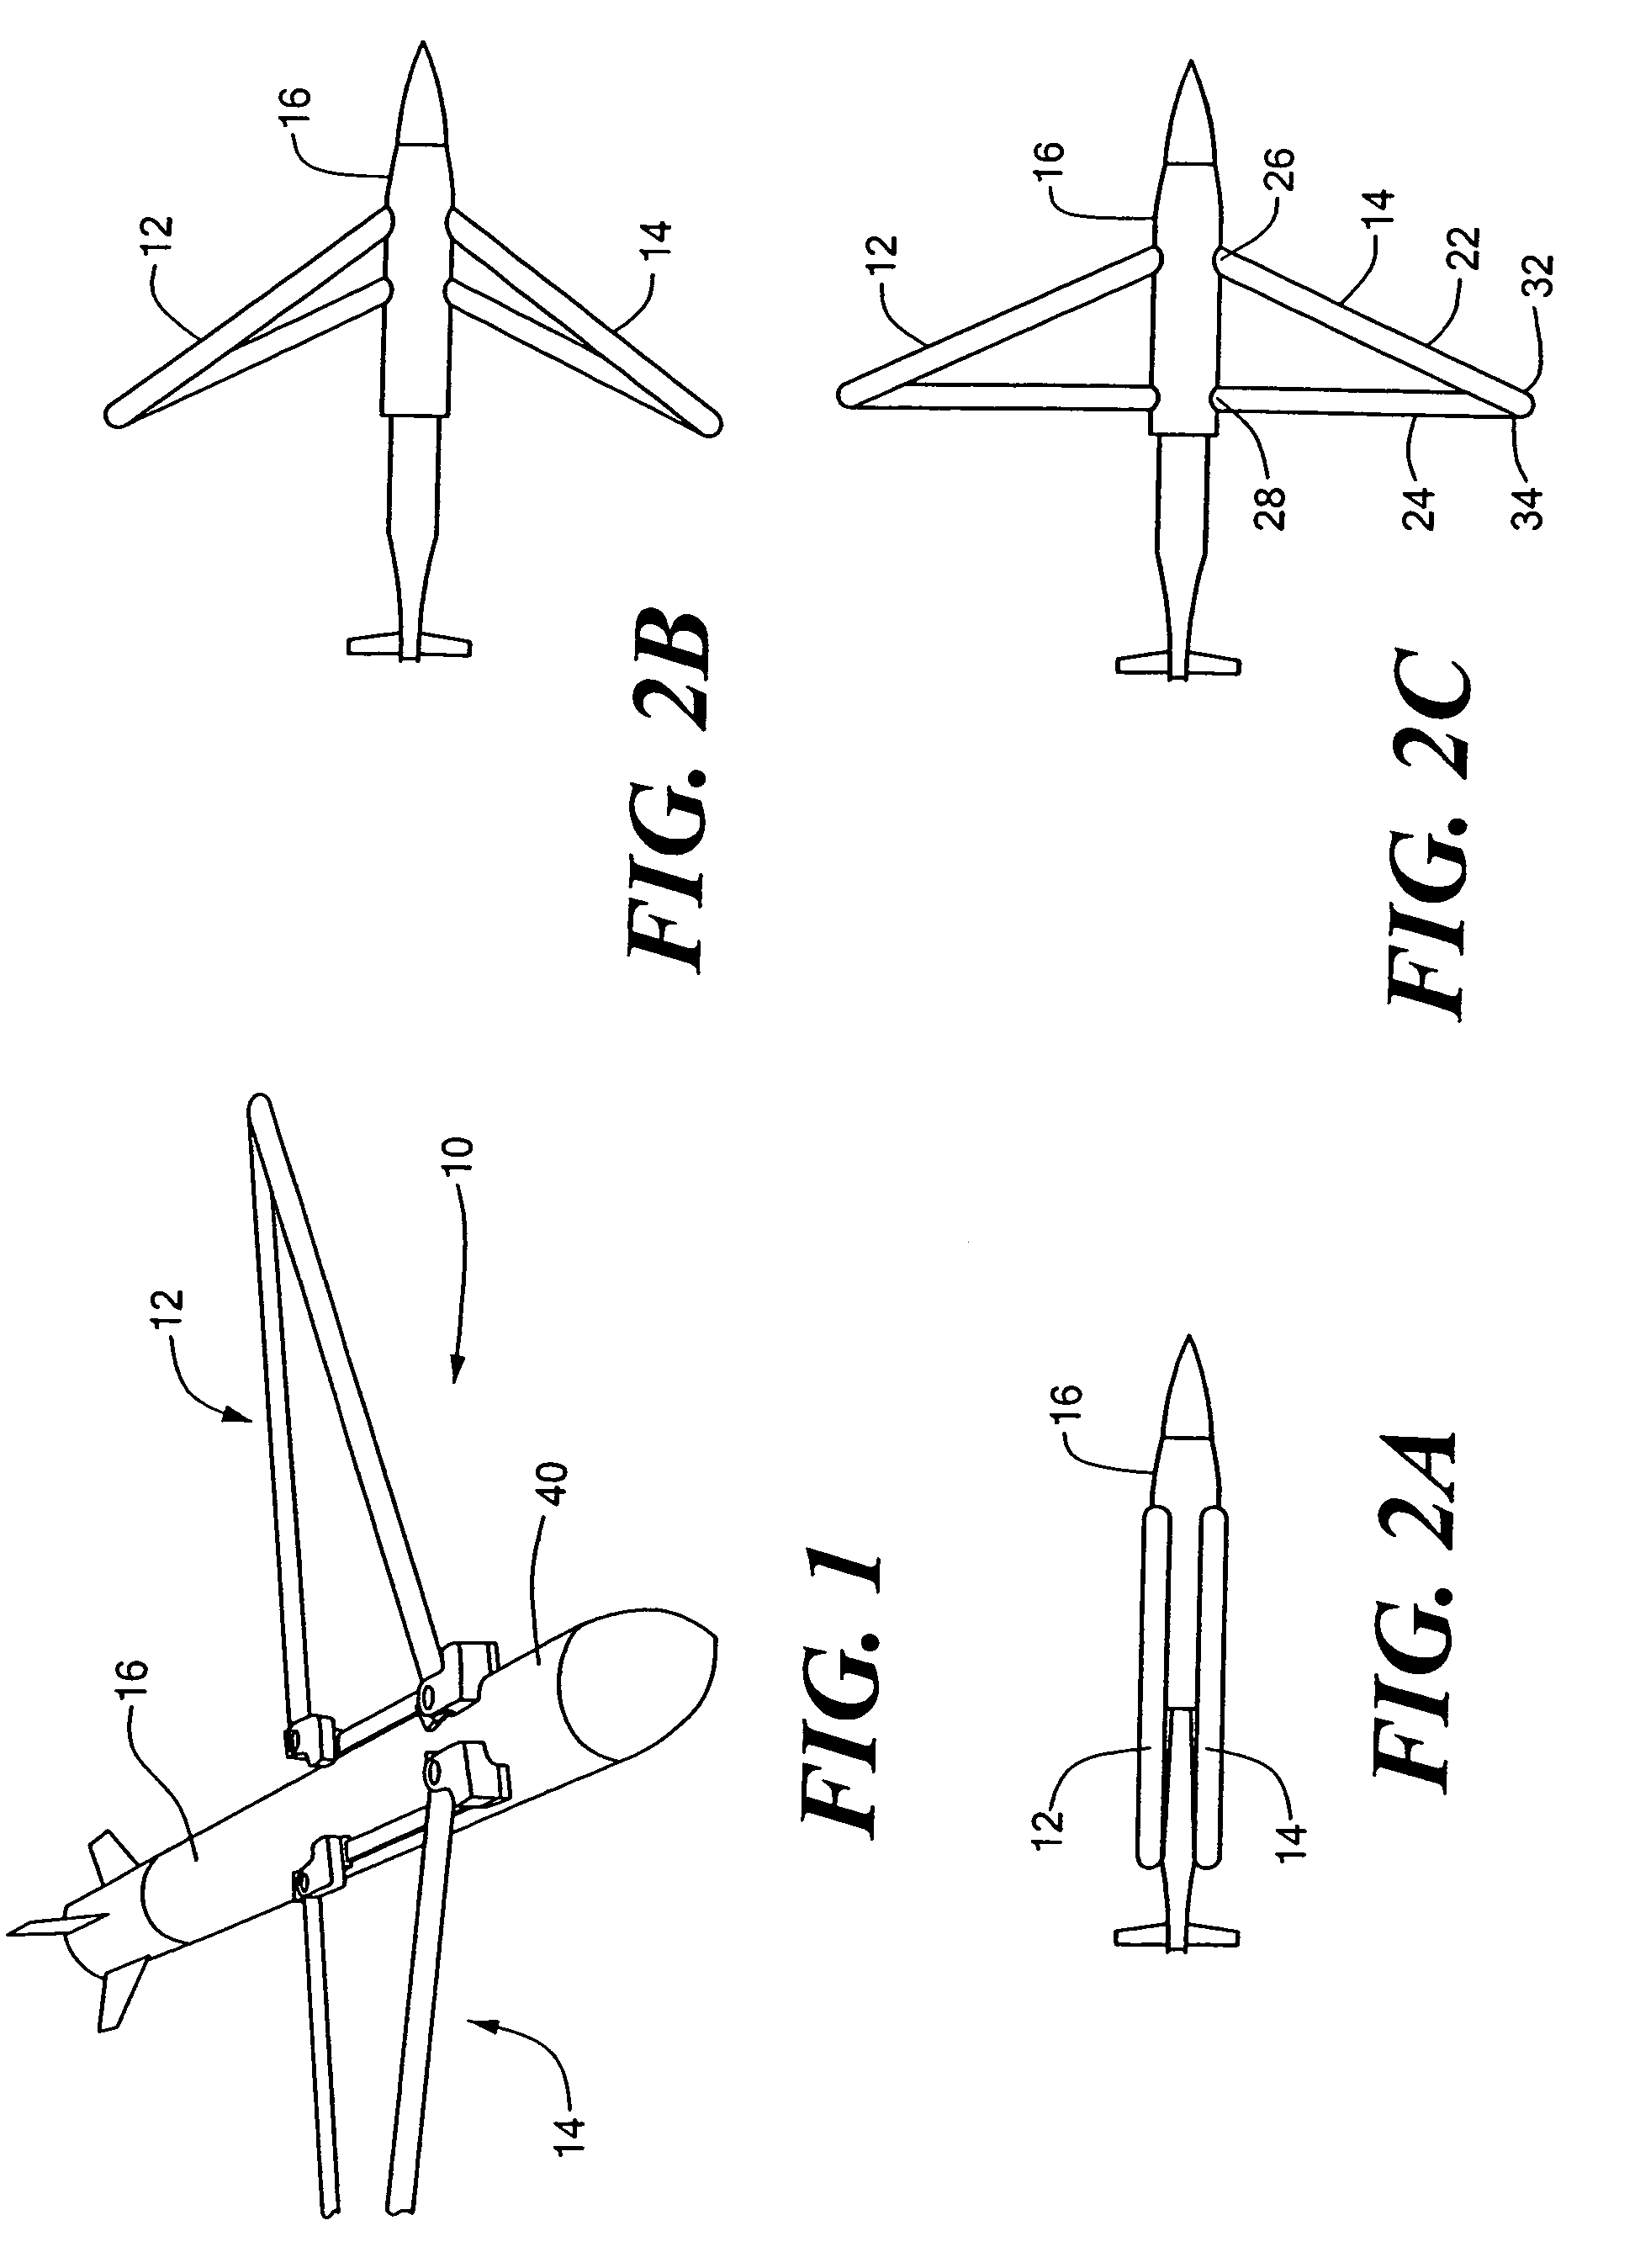 Extendable joined wing system for a fluid-born body